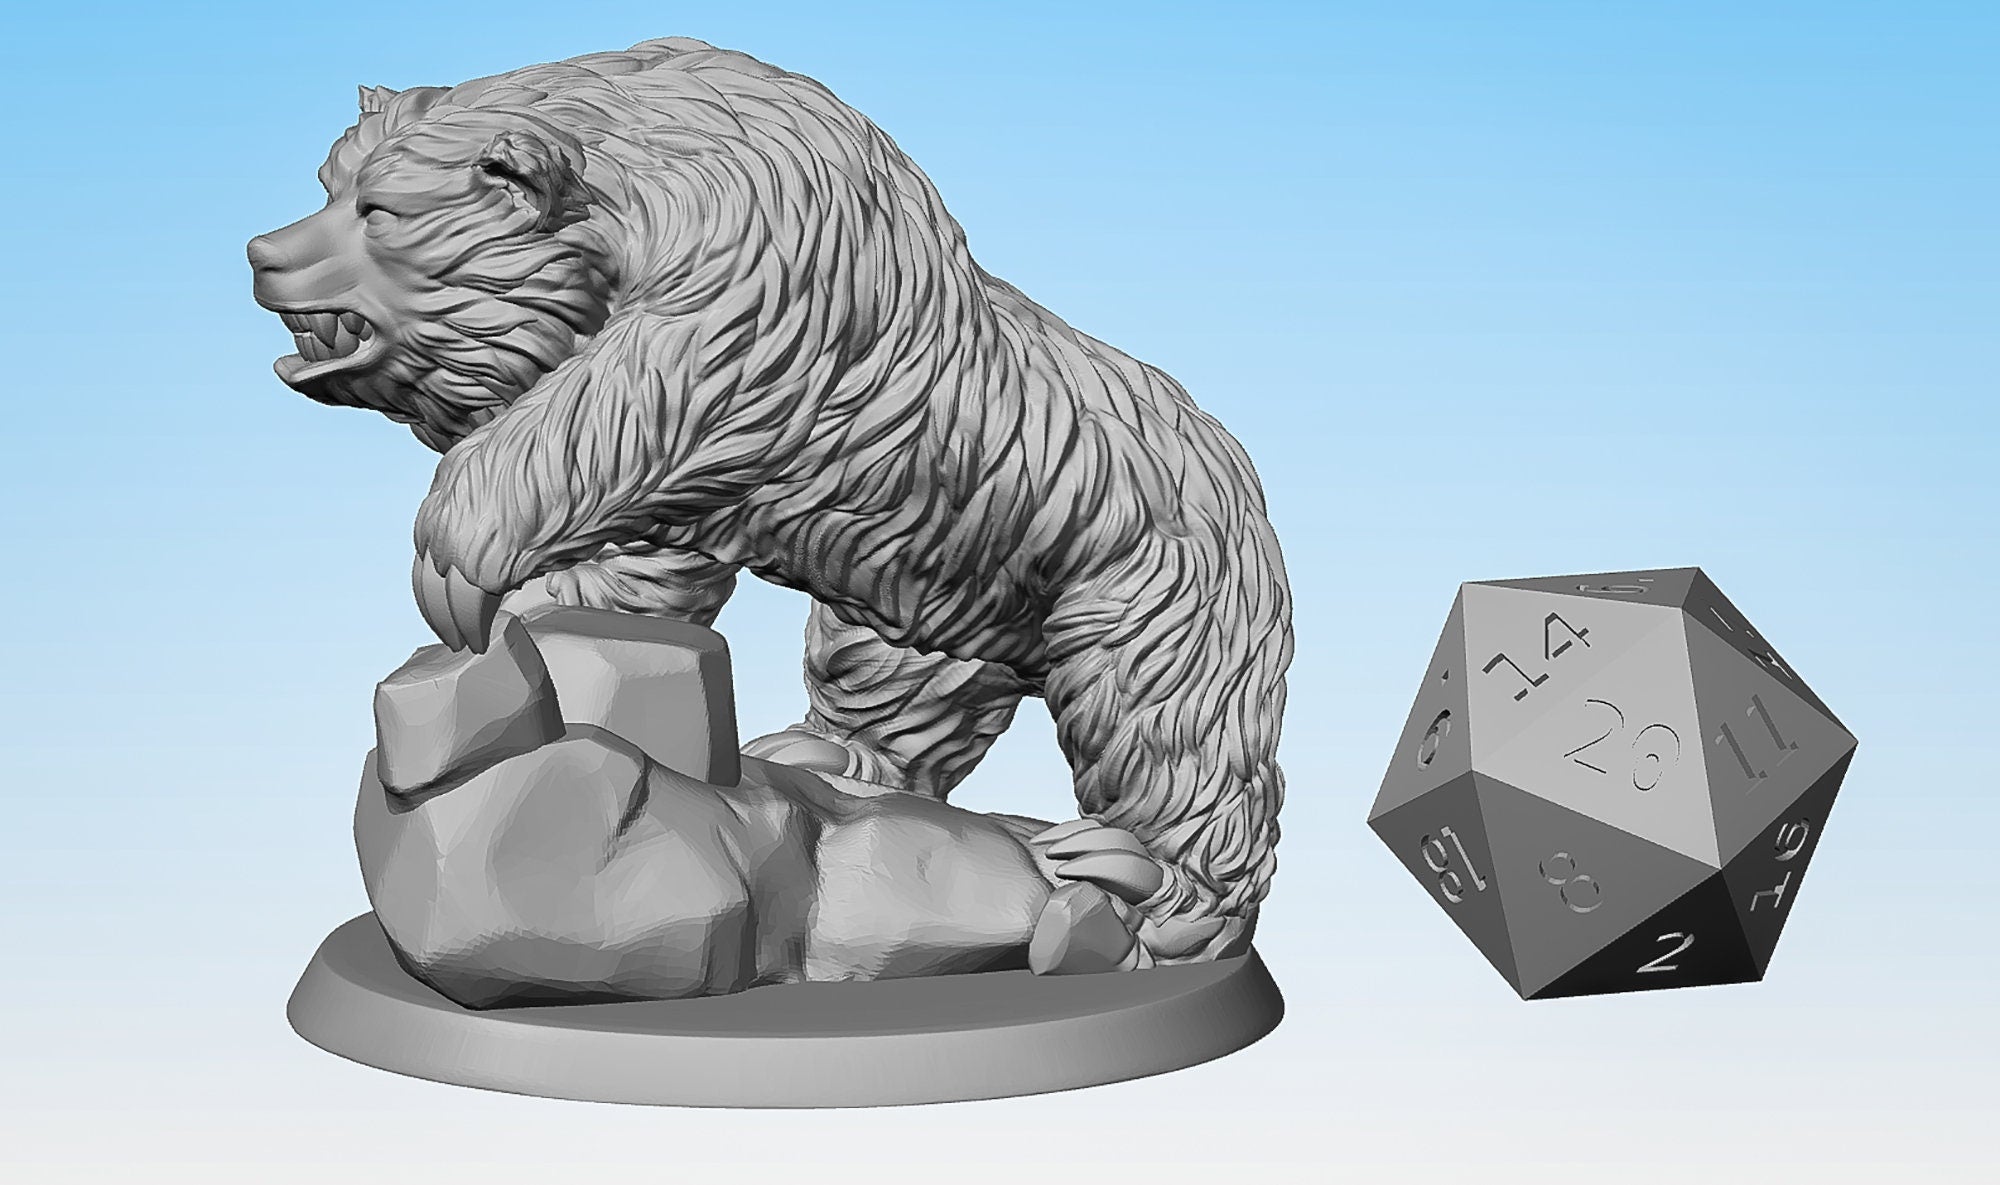 BEAR "Prowling" | Dungeons and Dragons | DnD | Pathfinder | Tabletop | RPAG | Hero Size | 28 mm-Role Playing Miniatures